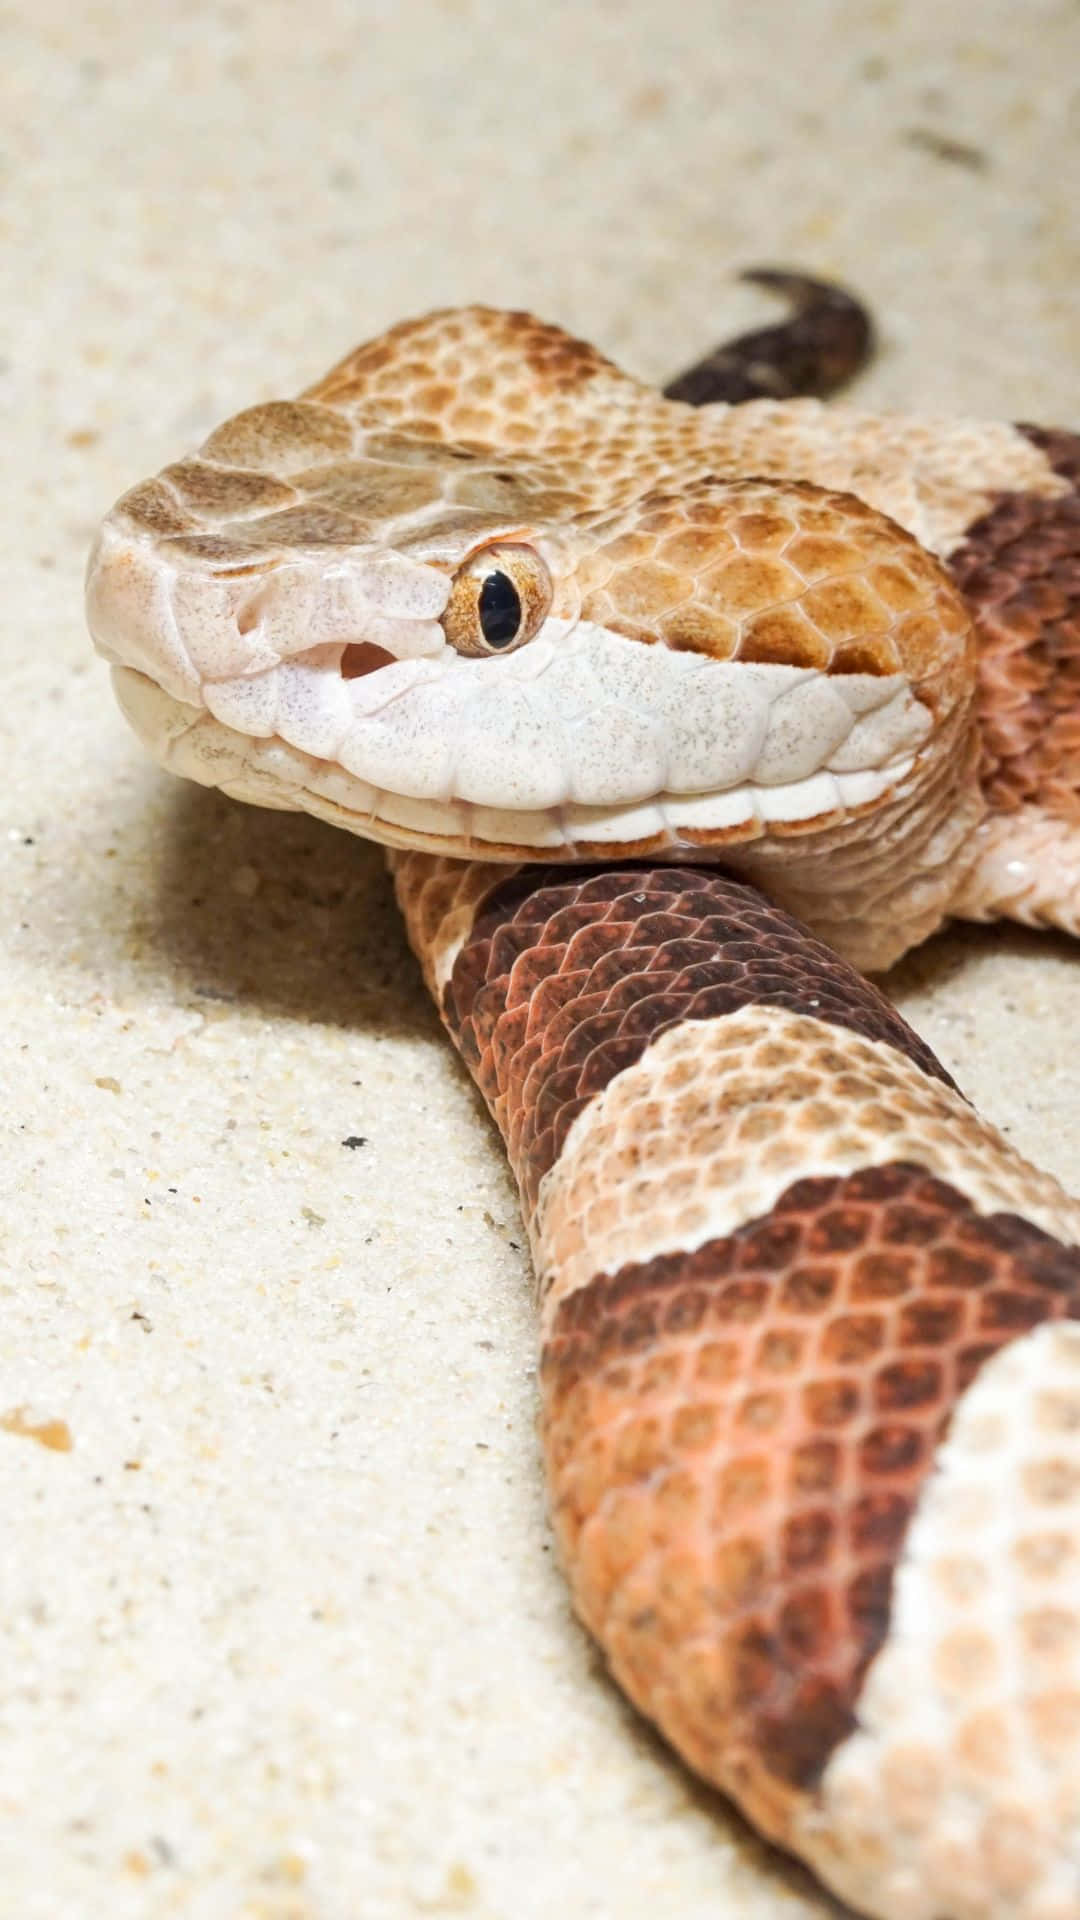 Free Illustrations - A Menacing Close-up Of A Large Snake's Face,  Showcasing Its Fangs And Striking Expression. This Photo Could Be Used For  Various Purposes, Such As Depicting A Scene From A